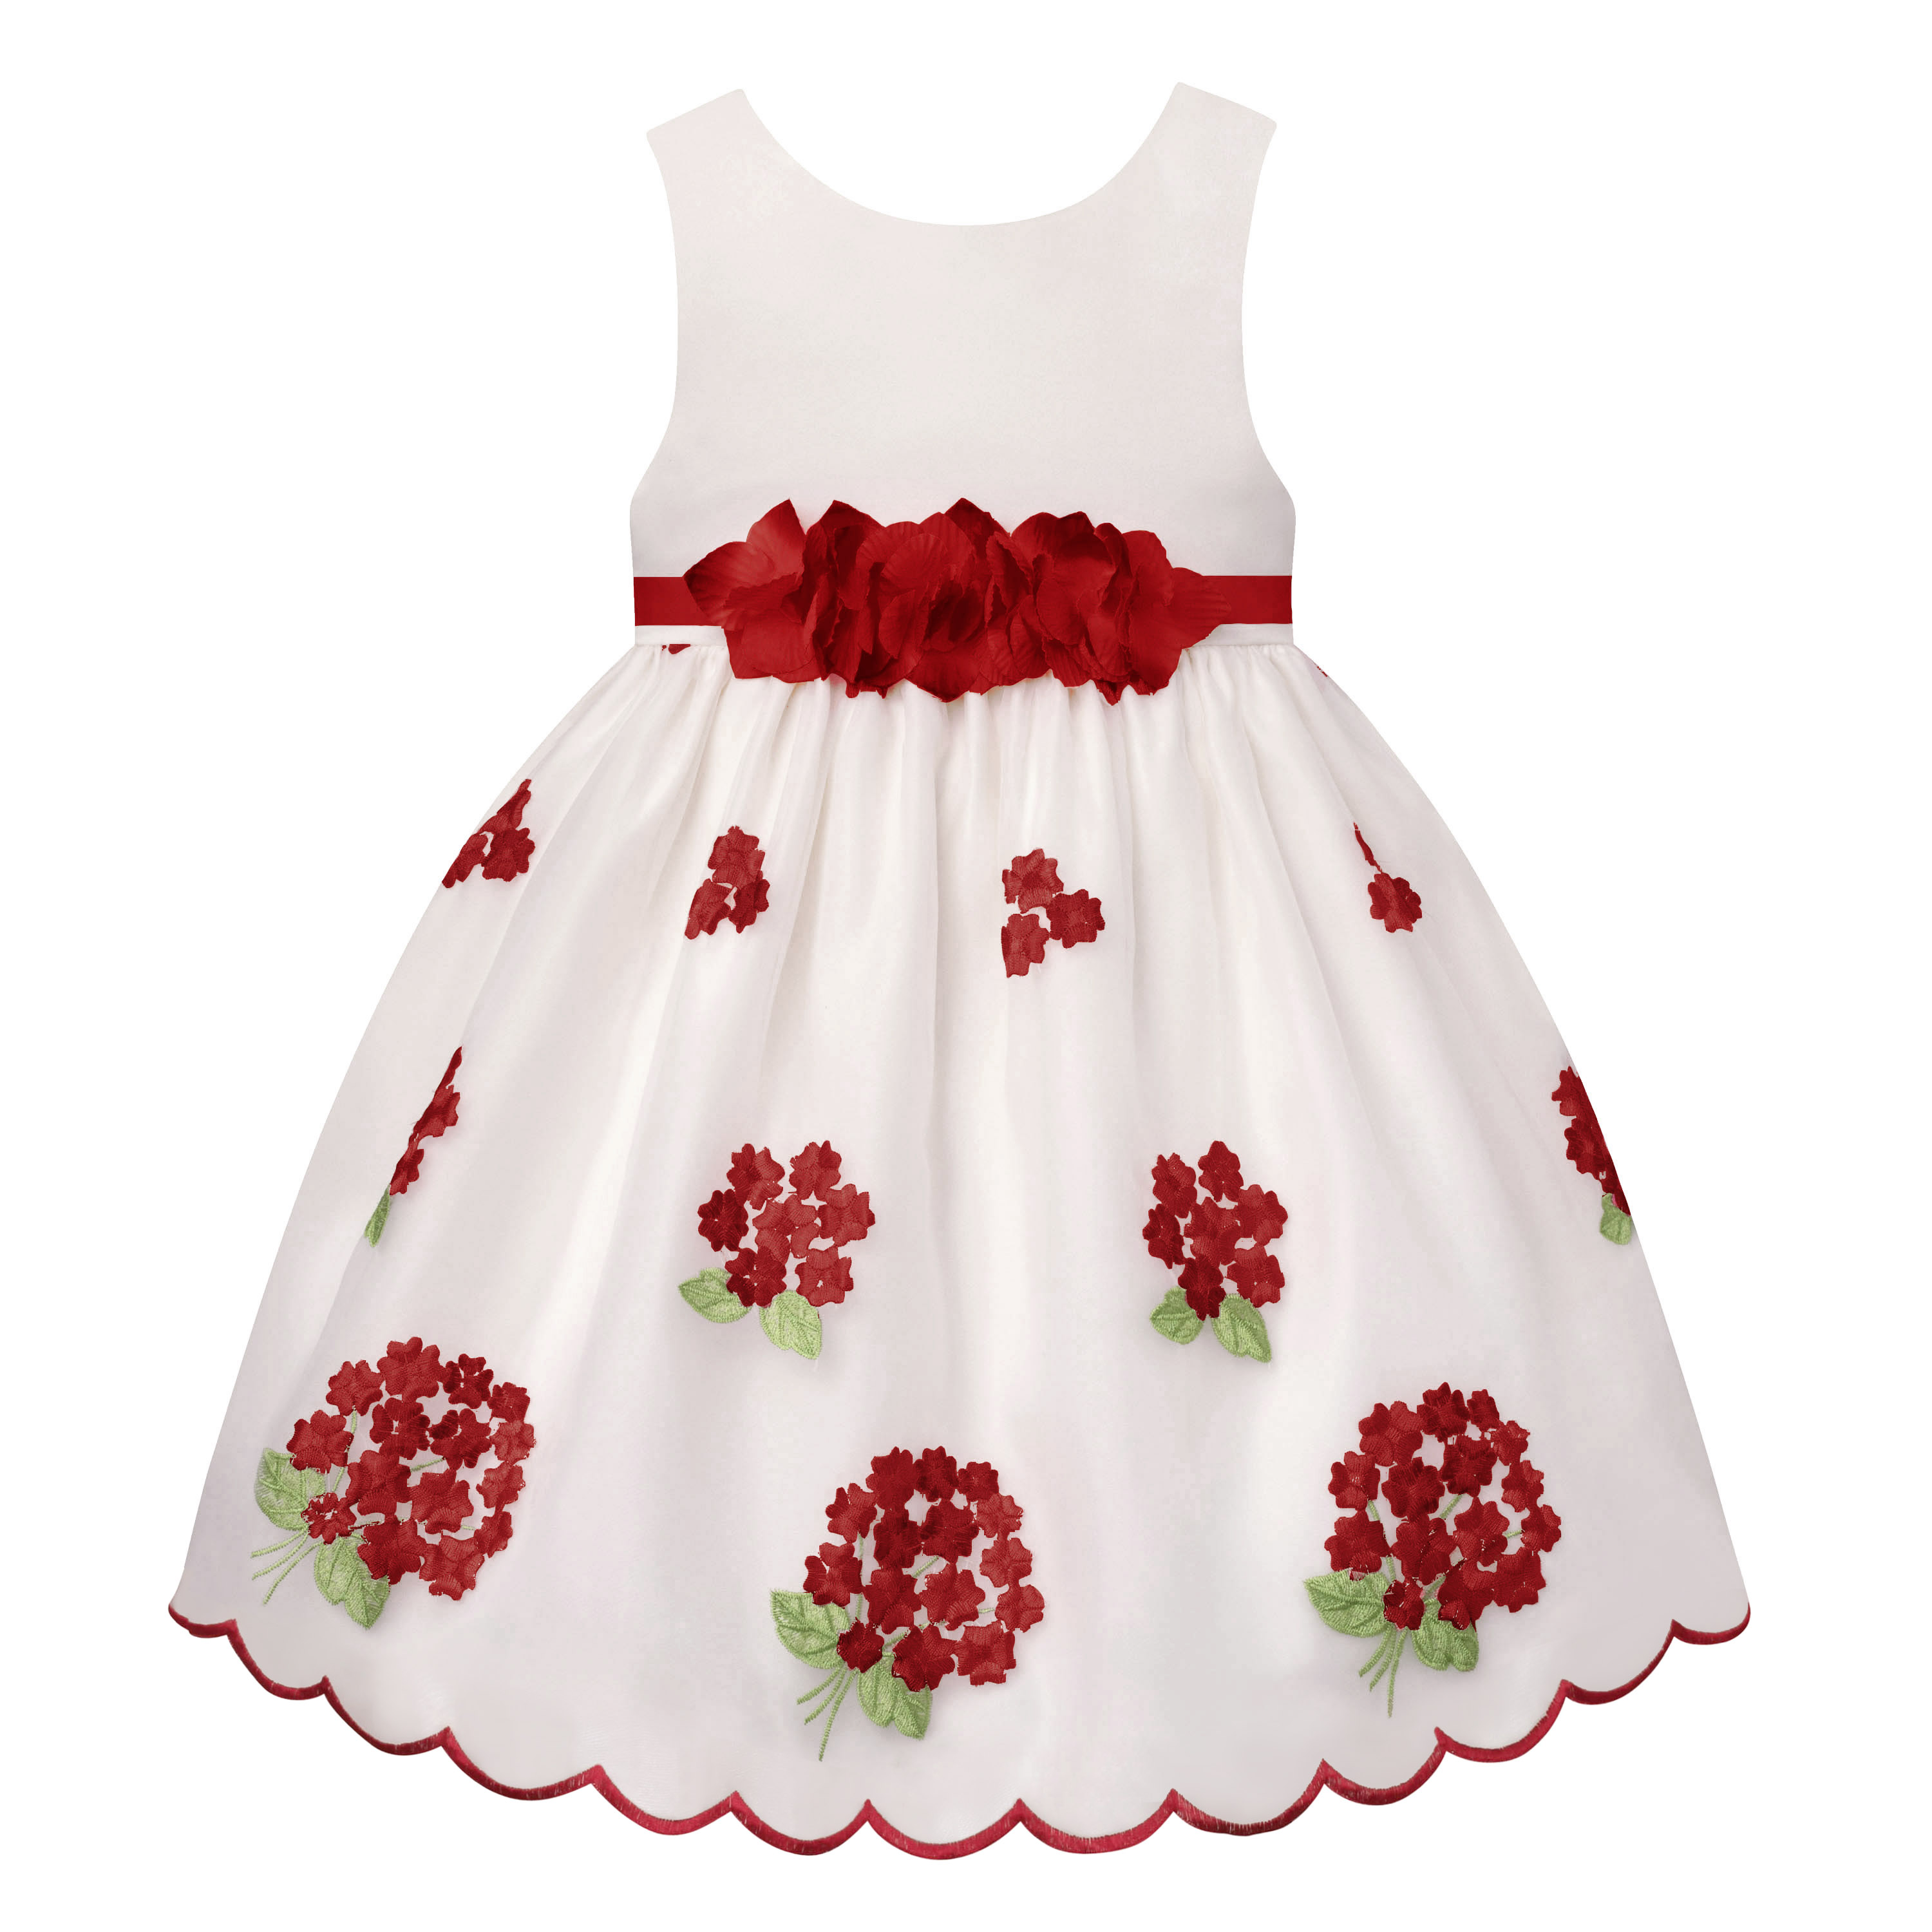 American Princess Infant And Toddler Girls Embroidered Sleeveless Dress